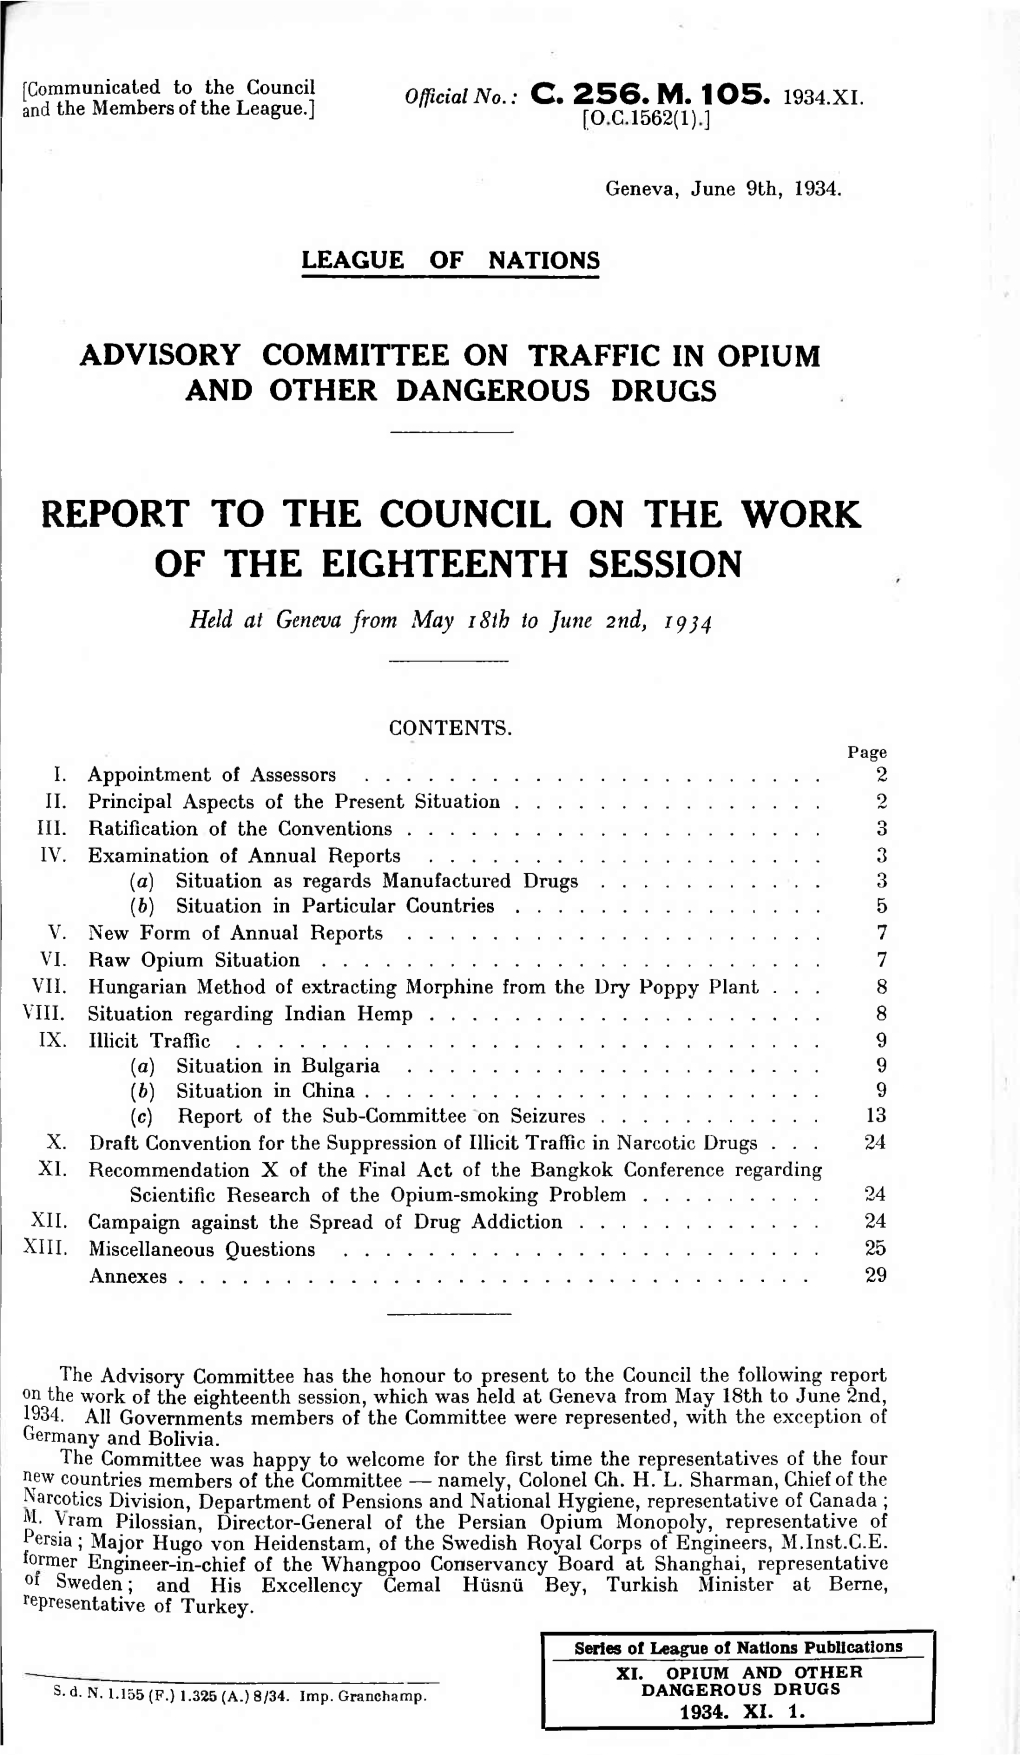 Report to the Council on the Work of the Eighteenth Session